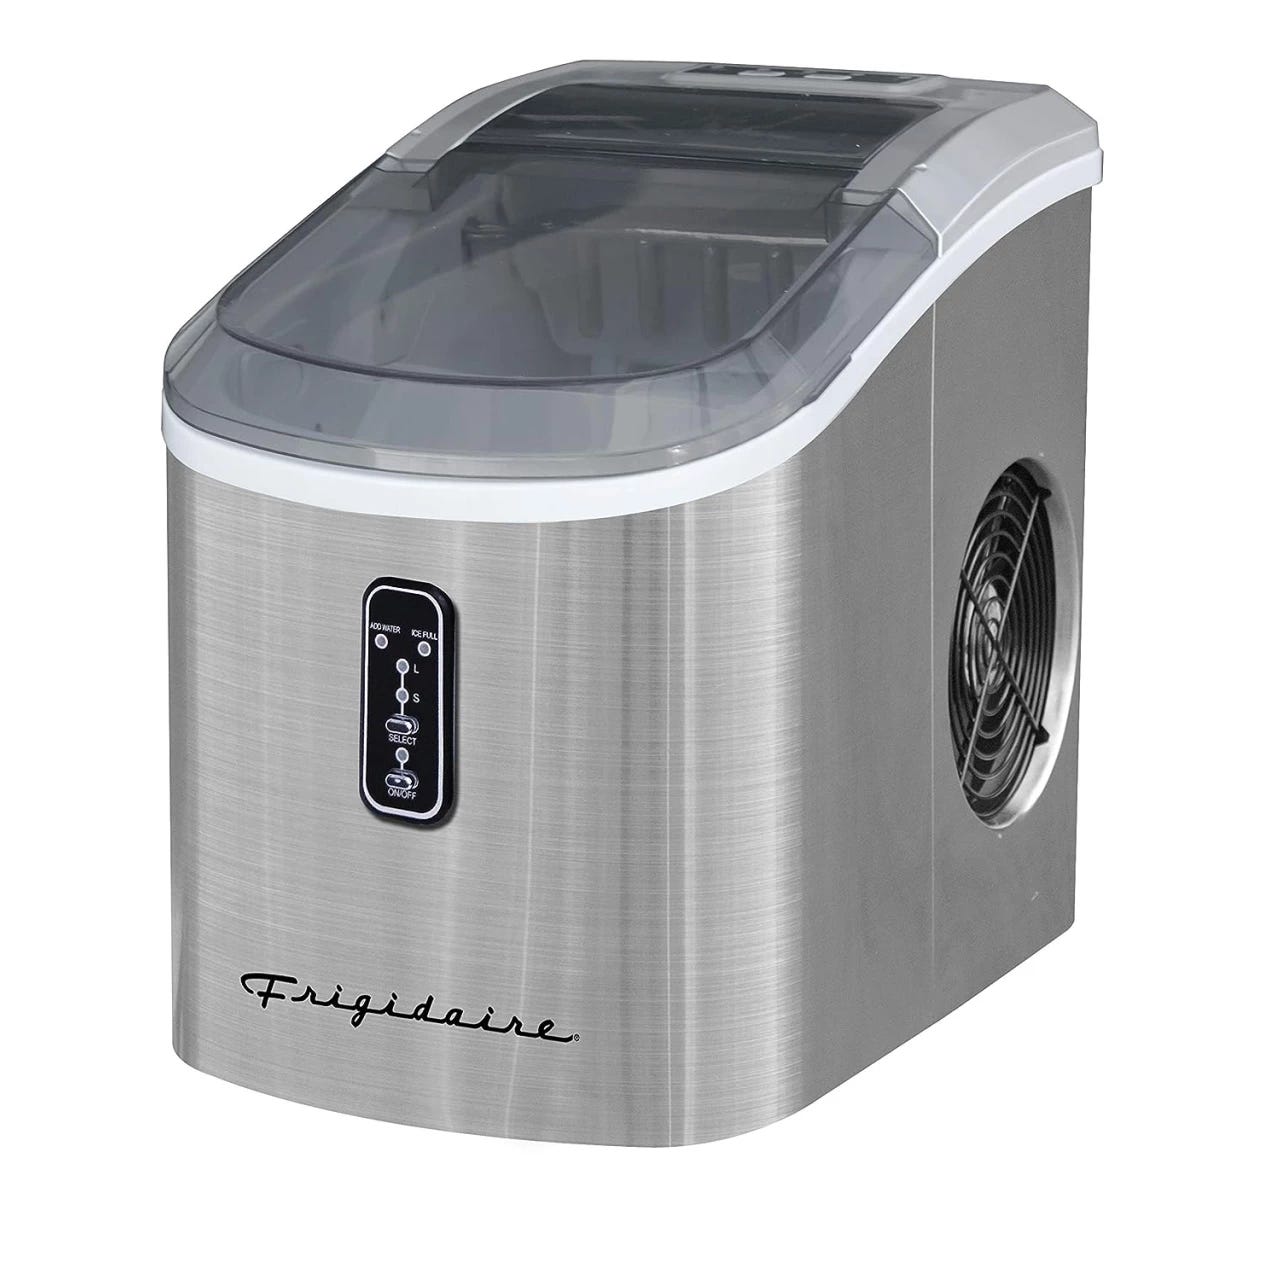 FRIGIDAIRE EFIC189-Silver Compact Ice Maker, 26 lb per Day, Silver  (Packaging May Vary)